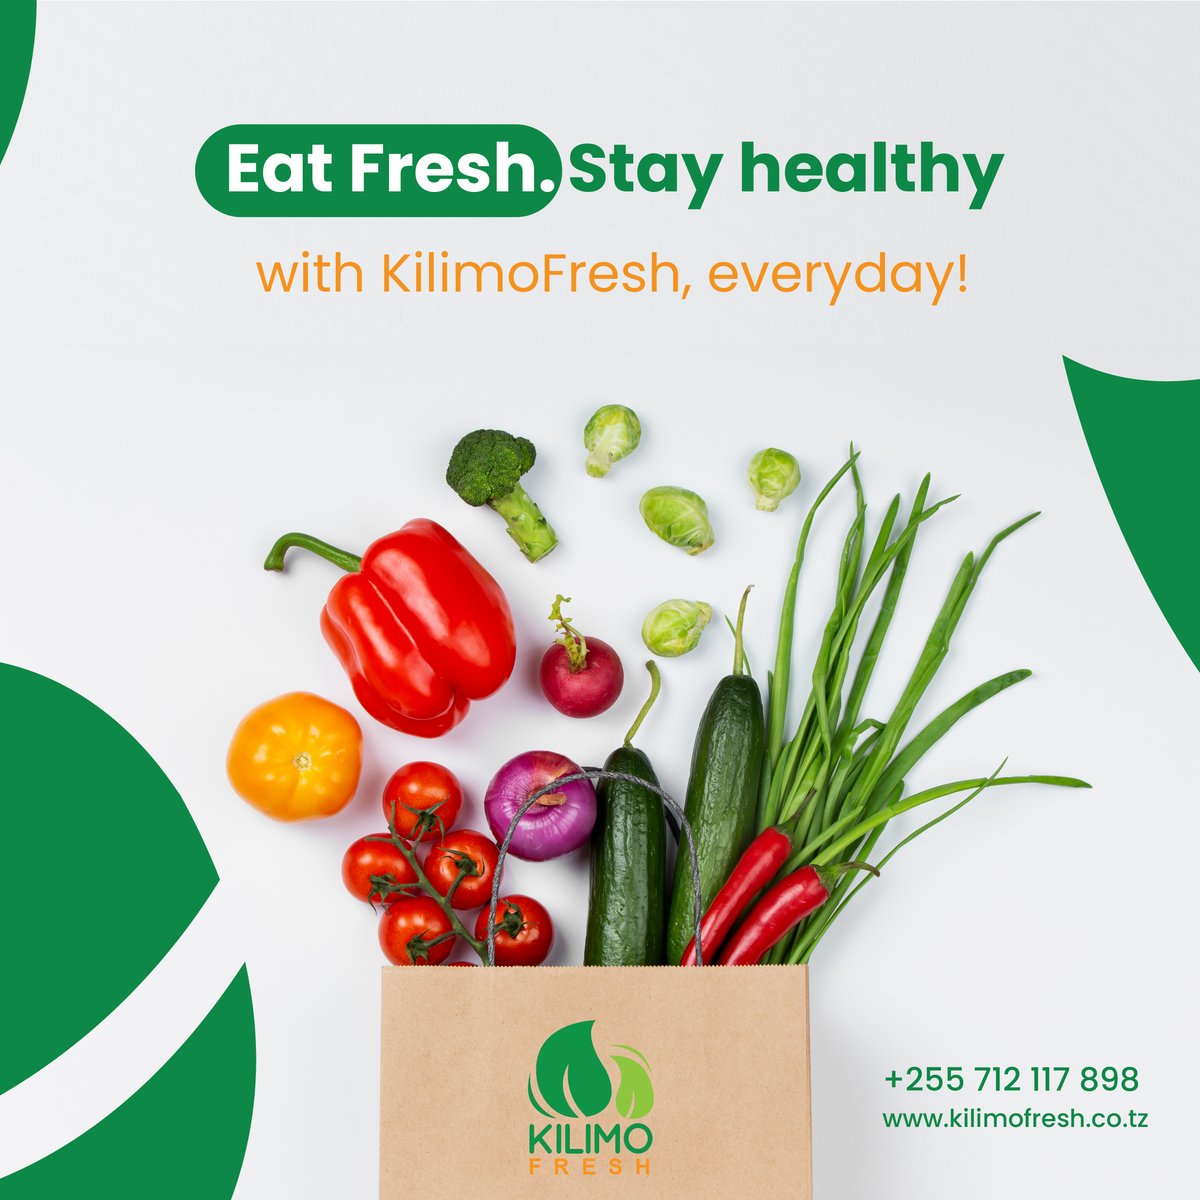 Visit our website or check out our store today to discover the amazing selection of fresh produce options we have for you.

#Kilimofresh #EatHealthyStayFresh #FreshLiving #Healthylifestyle #OrganicGoodness #wastenone #LocalSustainability #eatfresh #stayfresh #stayhealthy